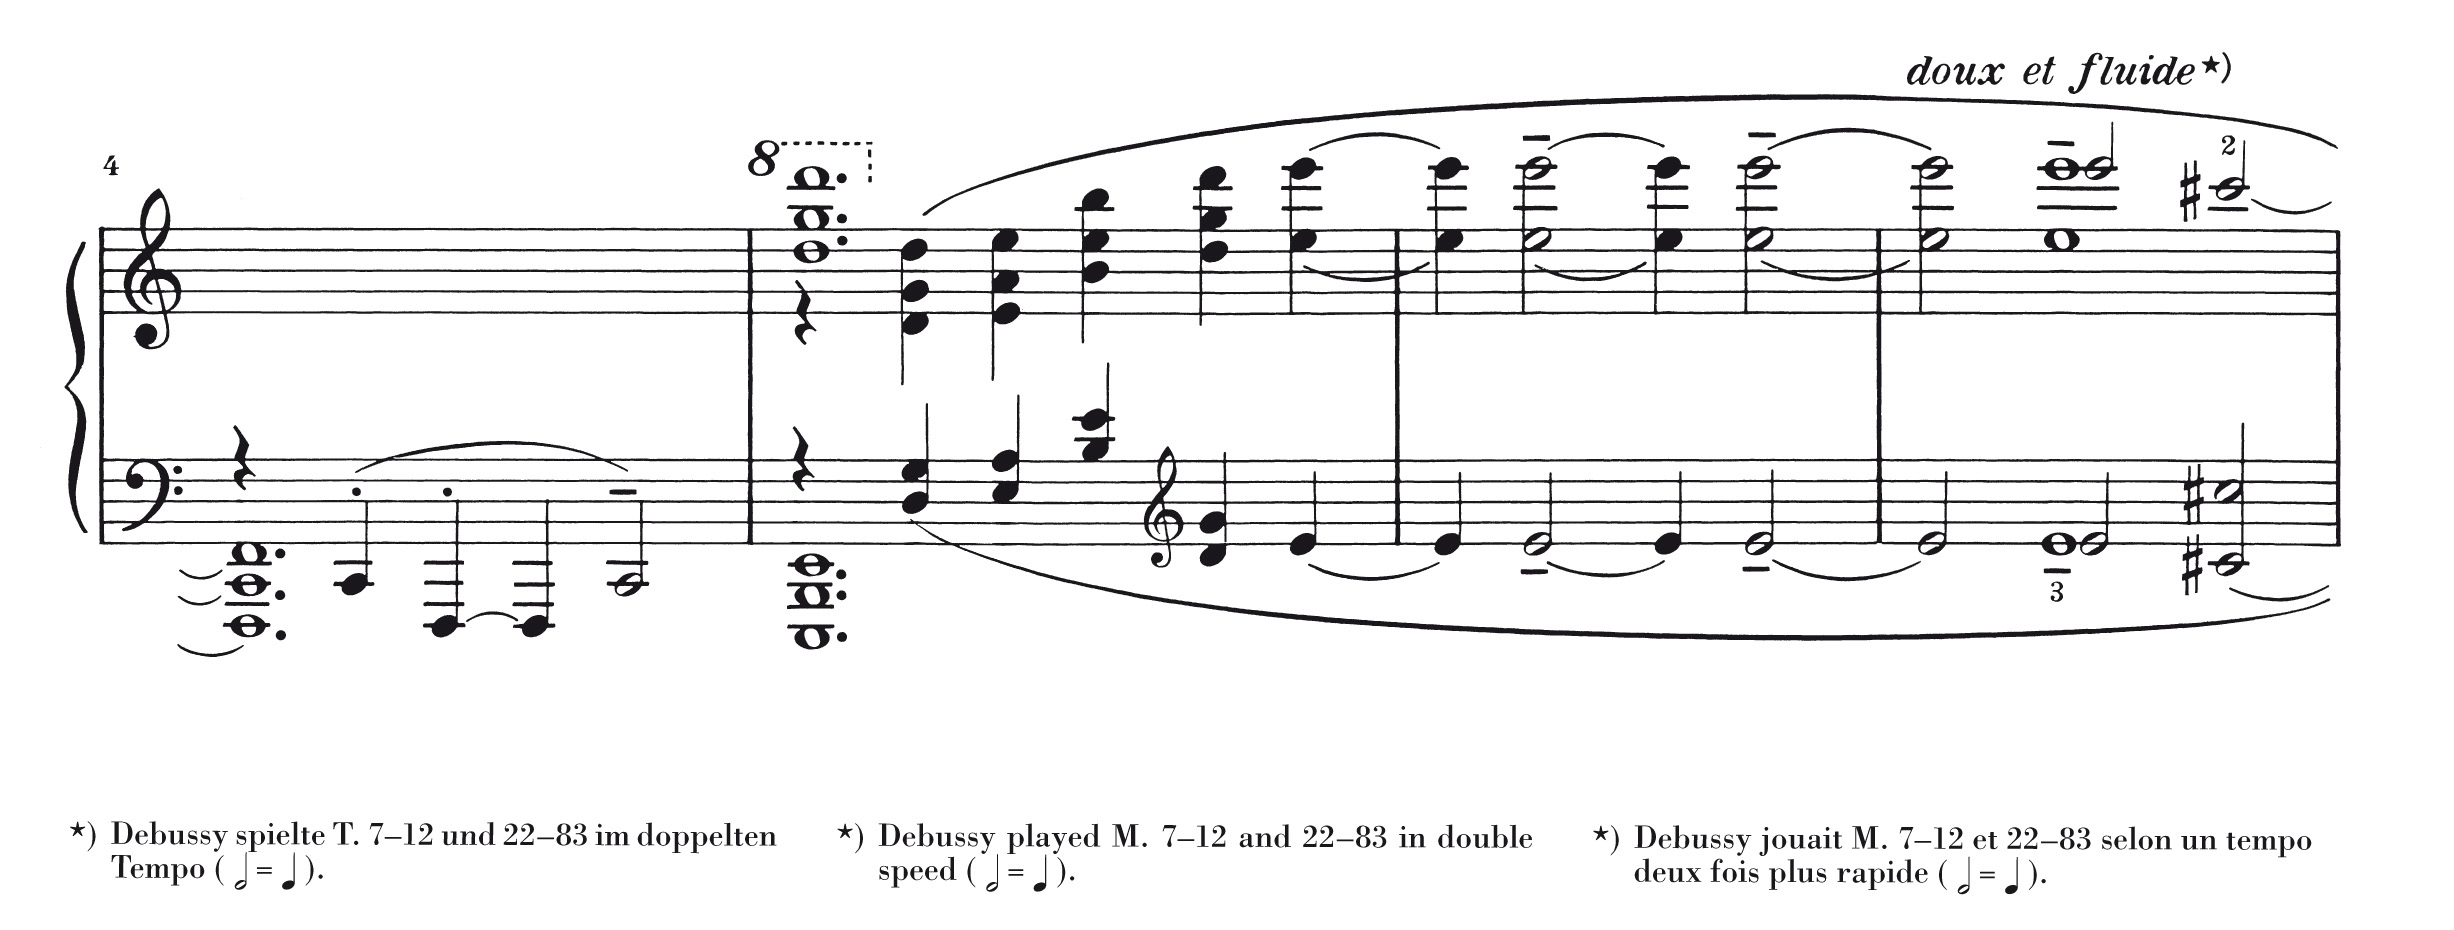 Debussy In Urtext Part 3 Debussy S Recordings Of His Piano Music Henle Blog